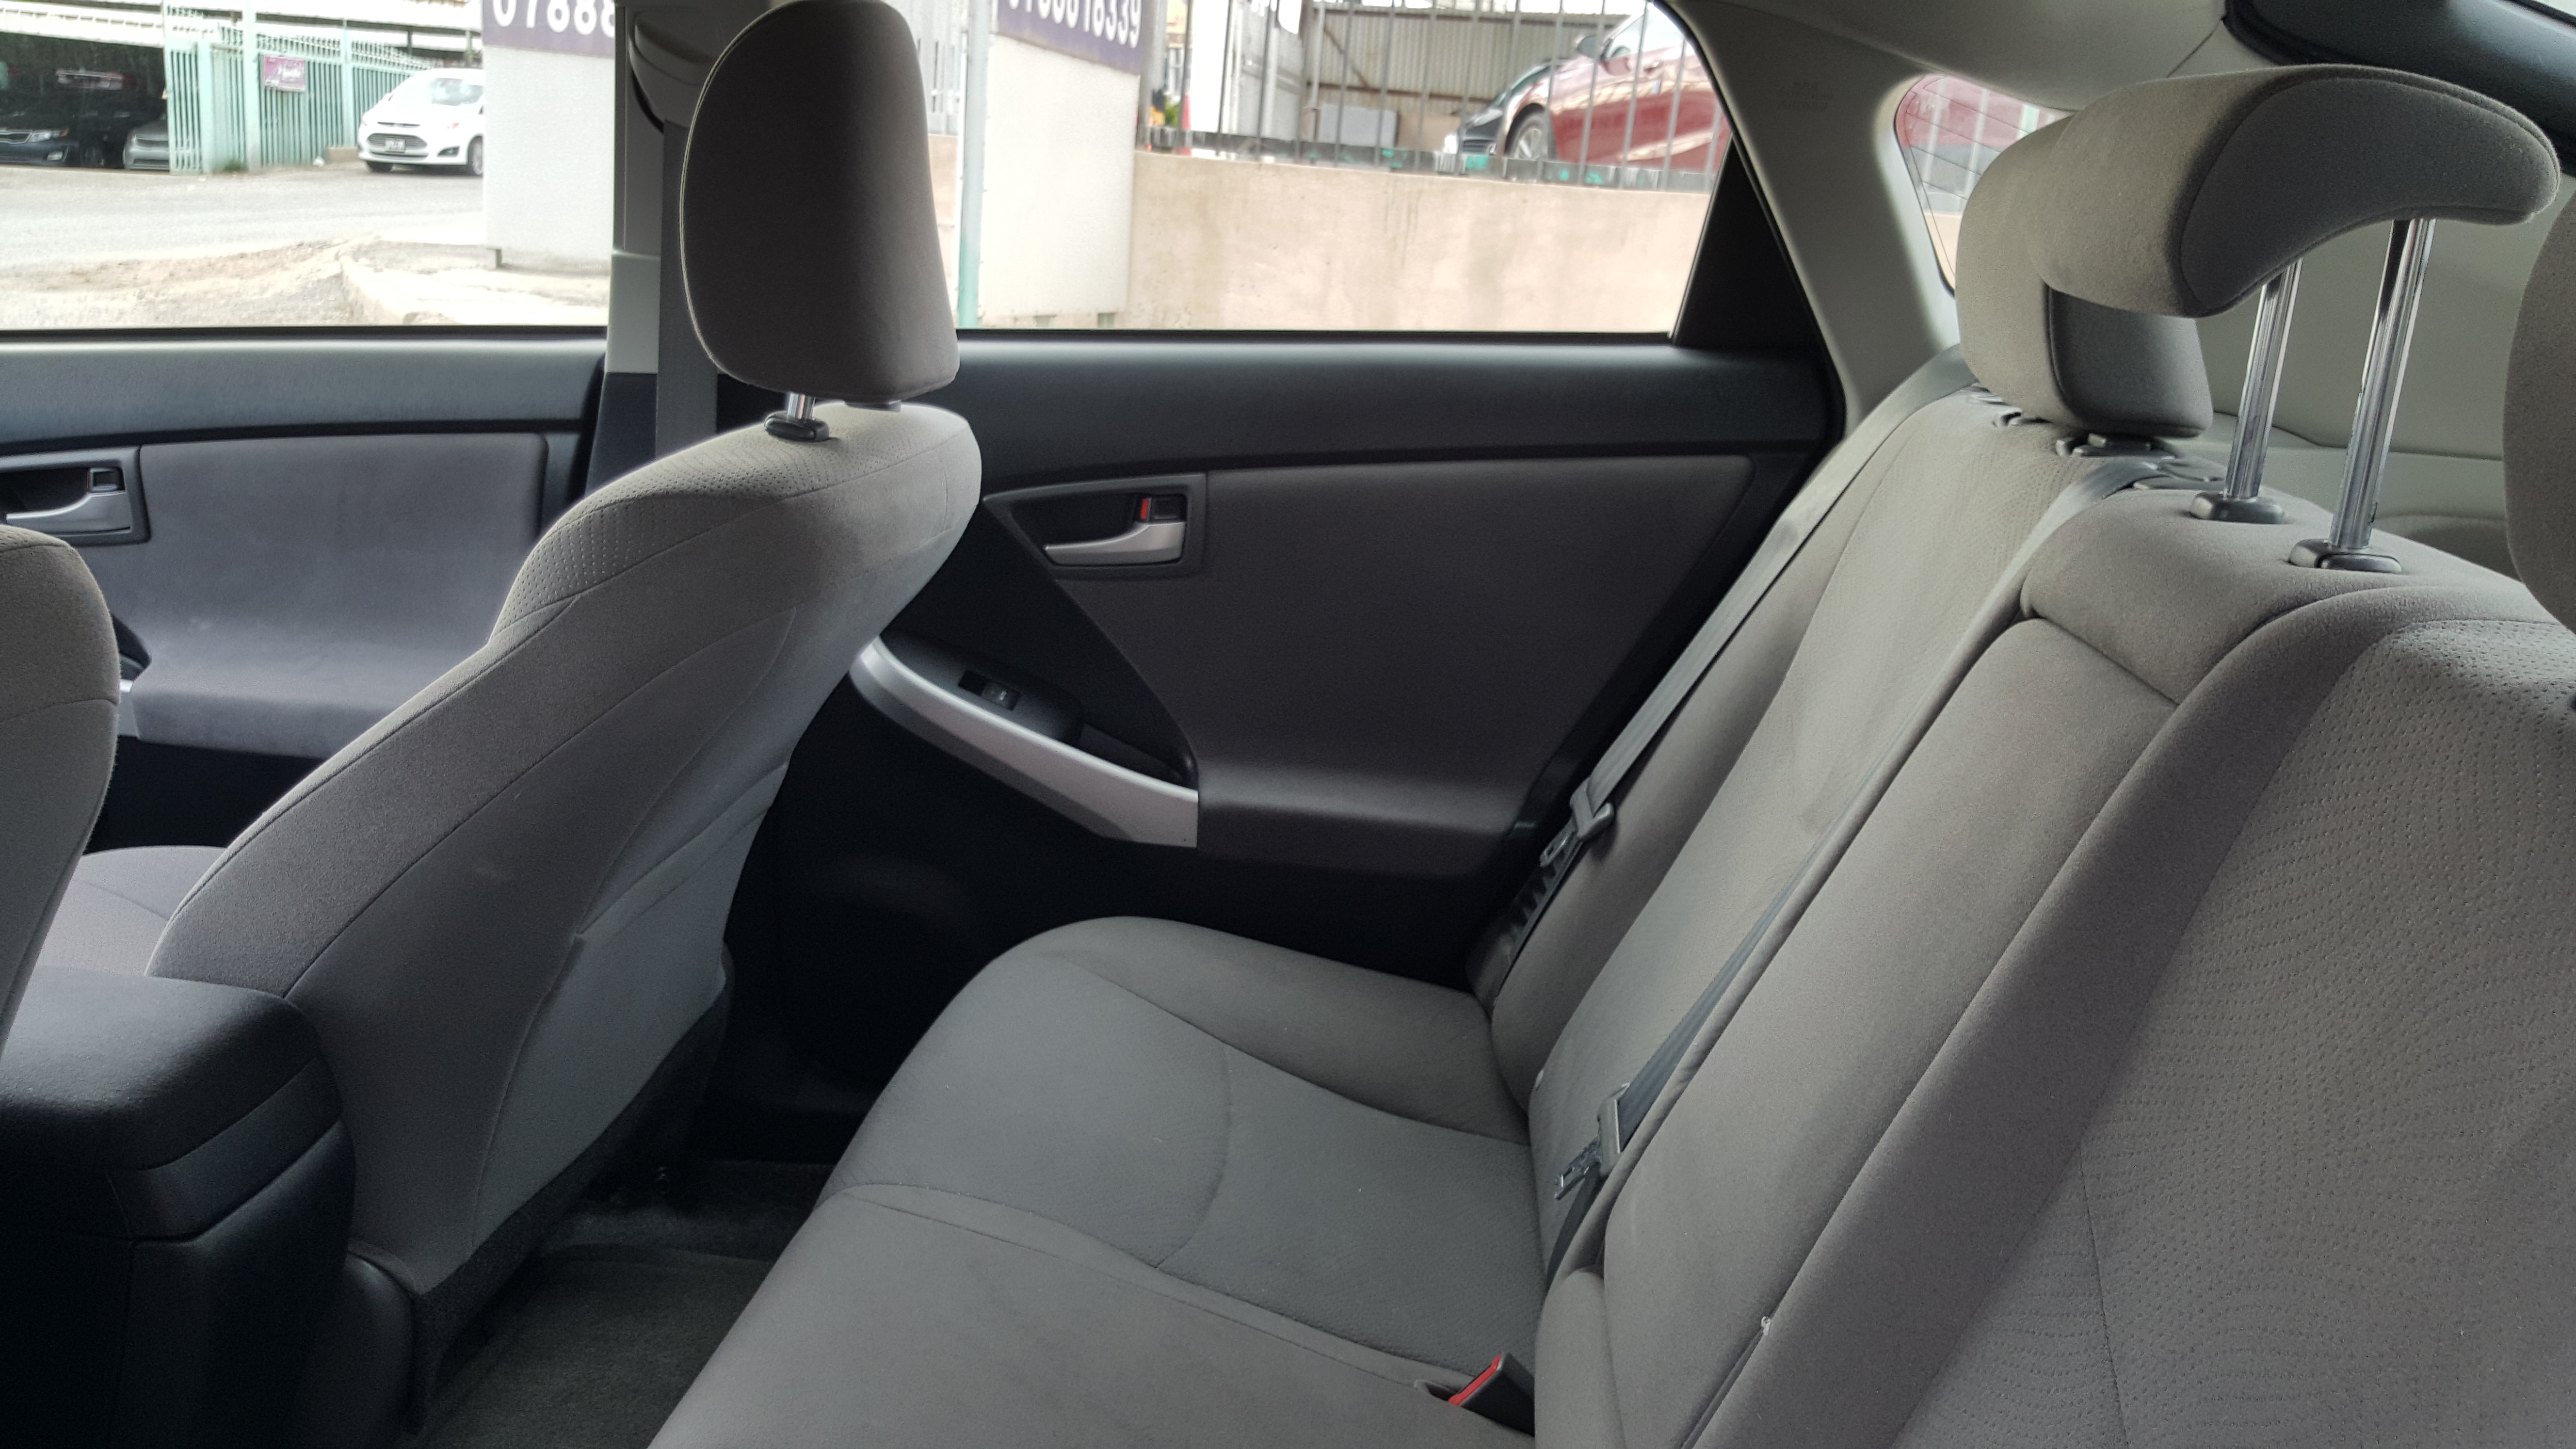 2016 Nissan patrol le platinum in good shape, clean and it is rarely used for some months, it runs on low kilometers, perfect tires, Gcc spec and it is in good -  تويوتا بريوس 2014 للبيع...